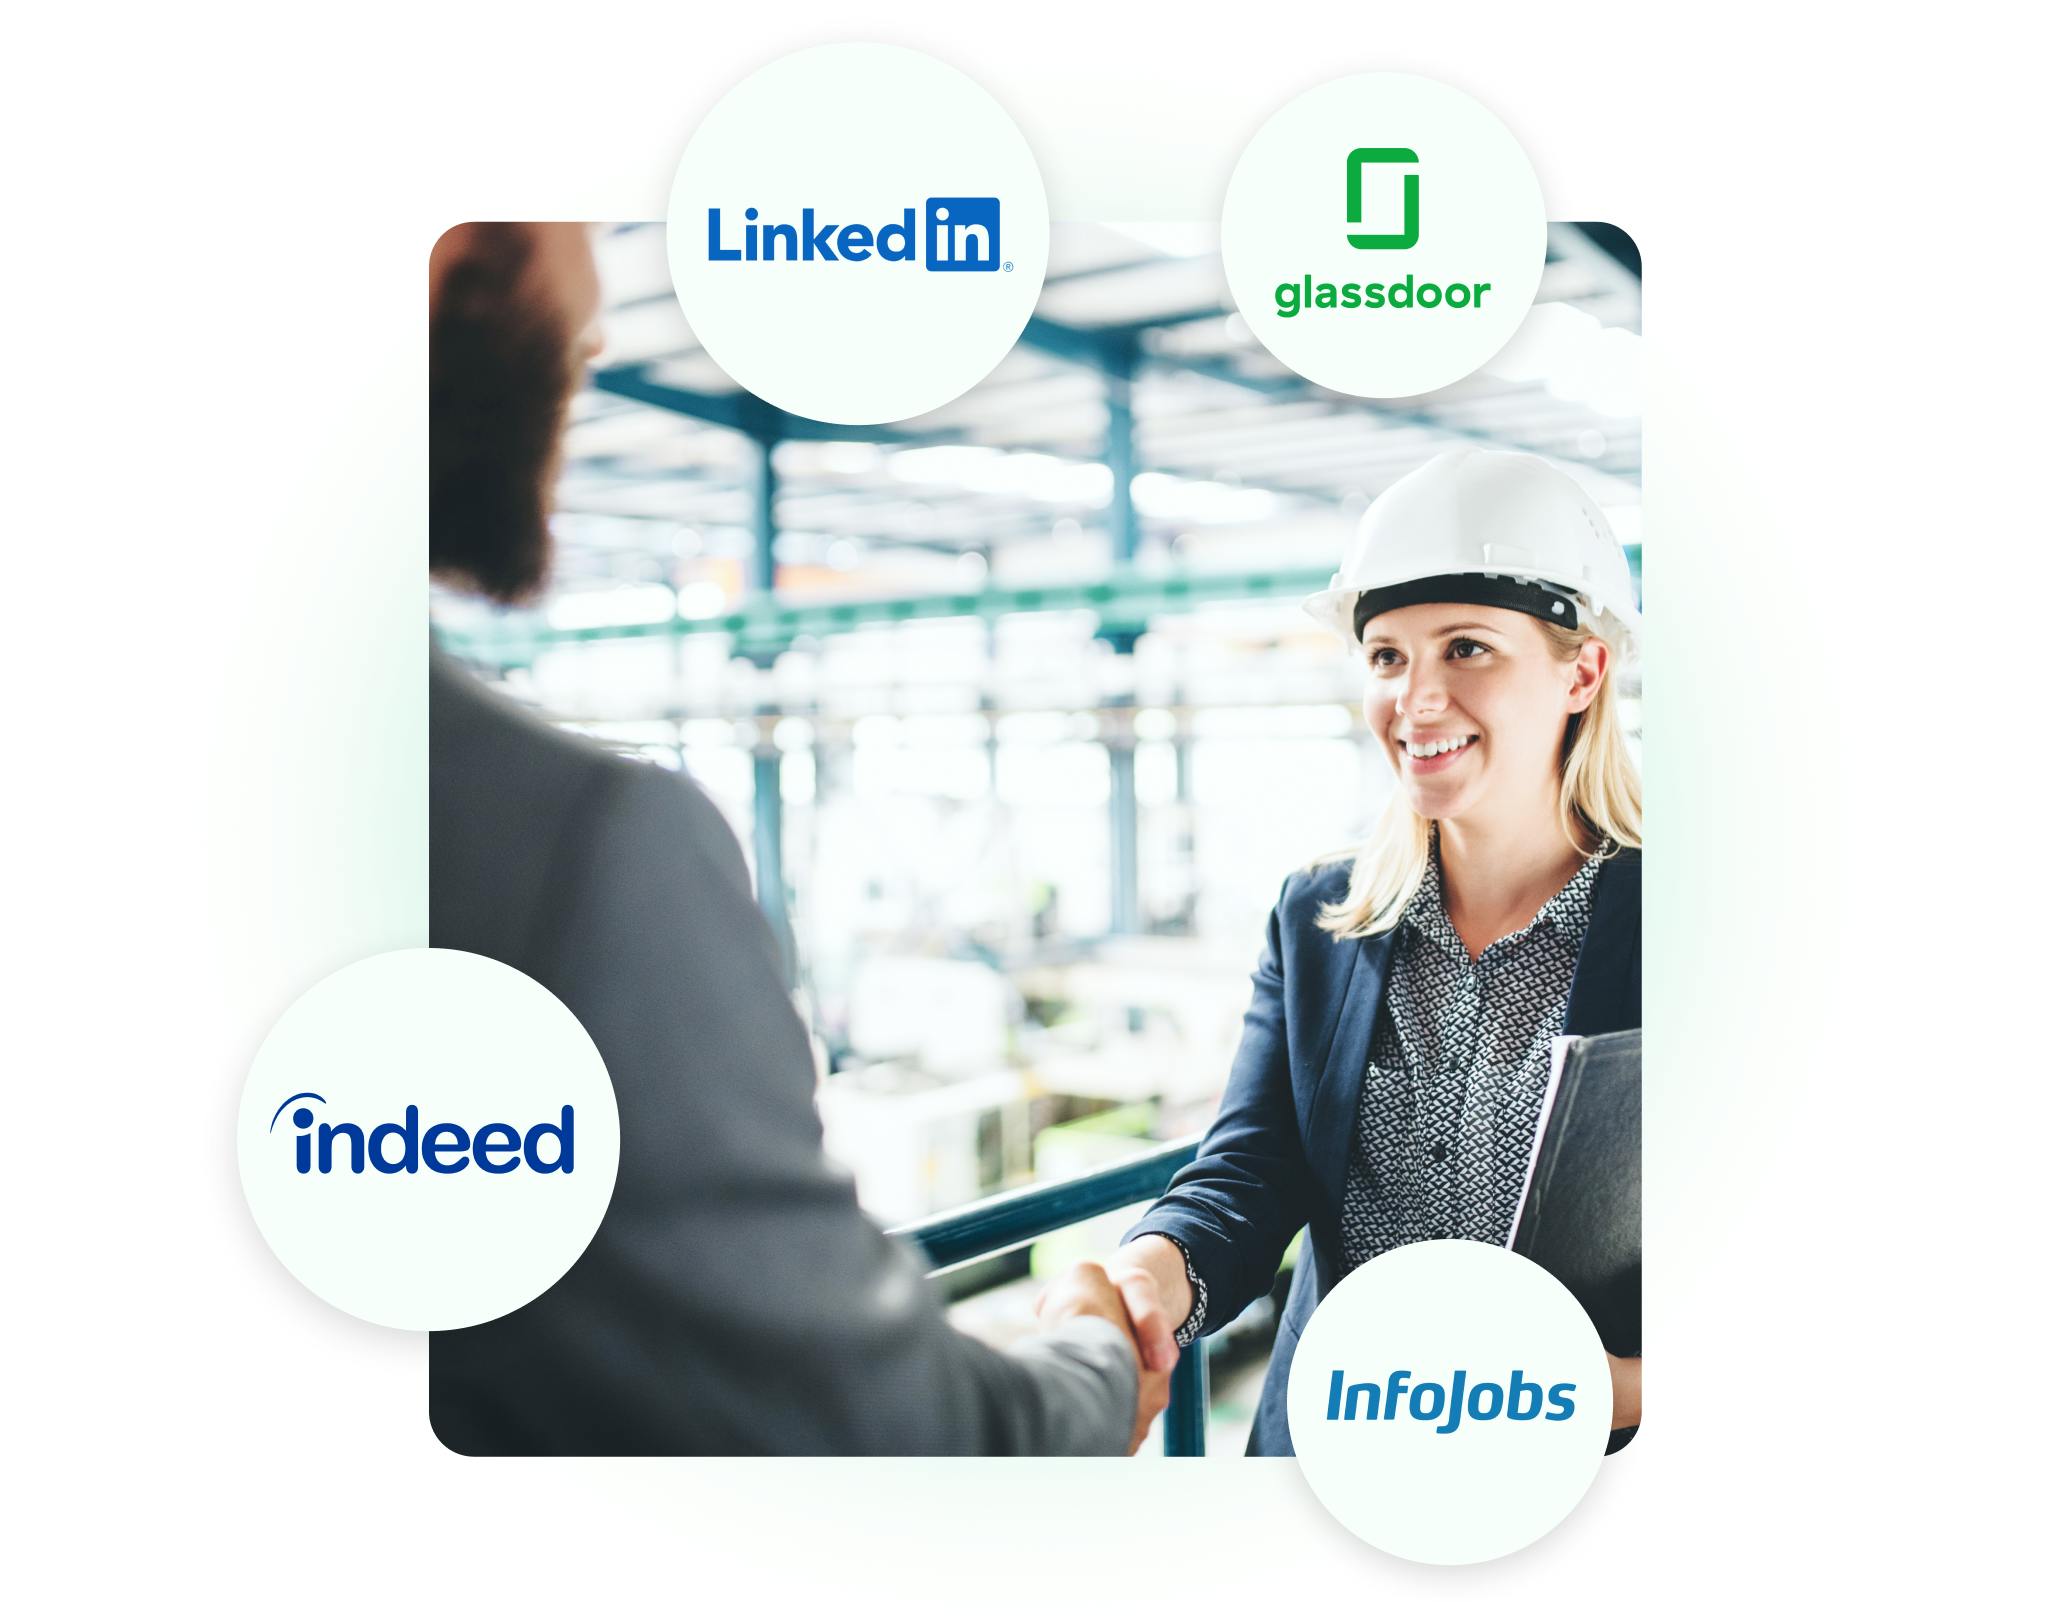 Kenjo extensions to find the best people such as LinkedIn, Glassdoor, Indeed and Infojobs.